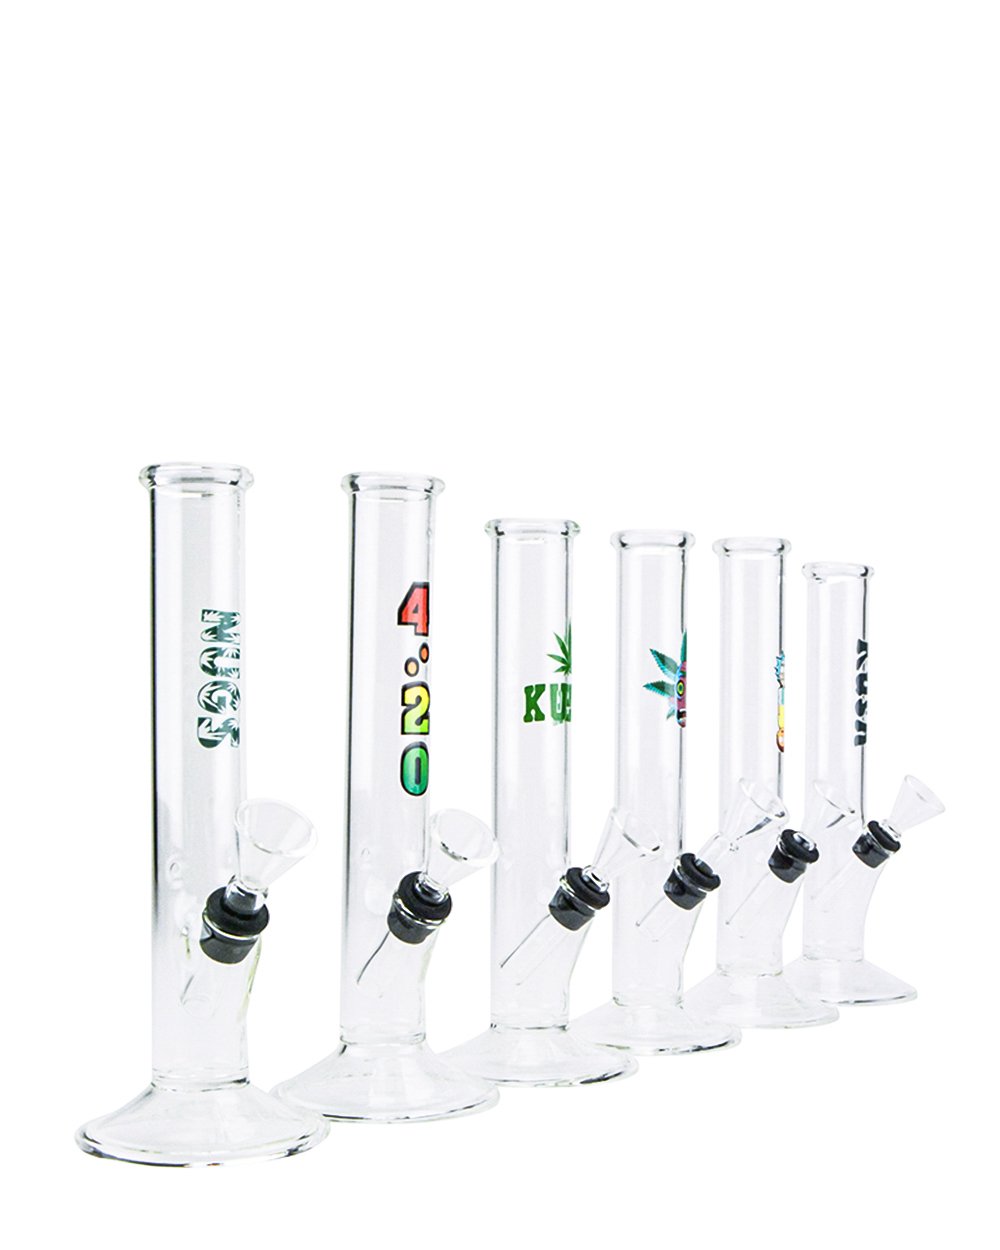 Straight Decal Glass Water Pipe | 7in Tall - Grommet Bowl - Clear - 13